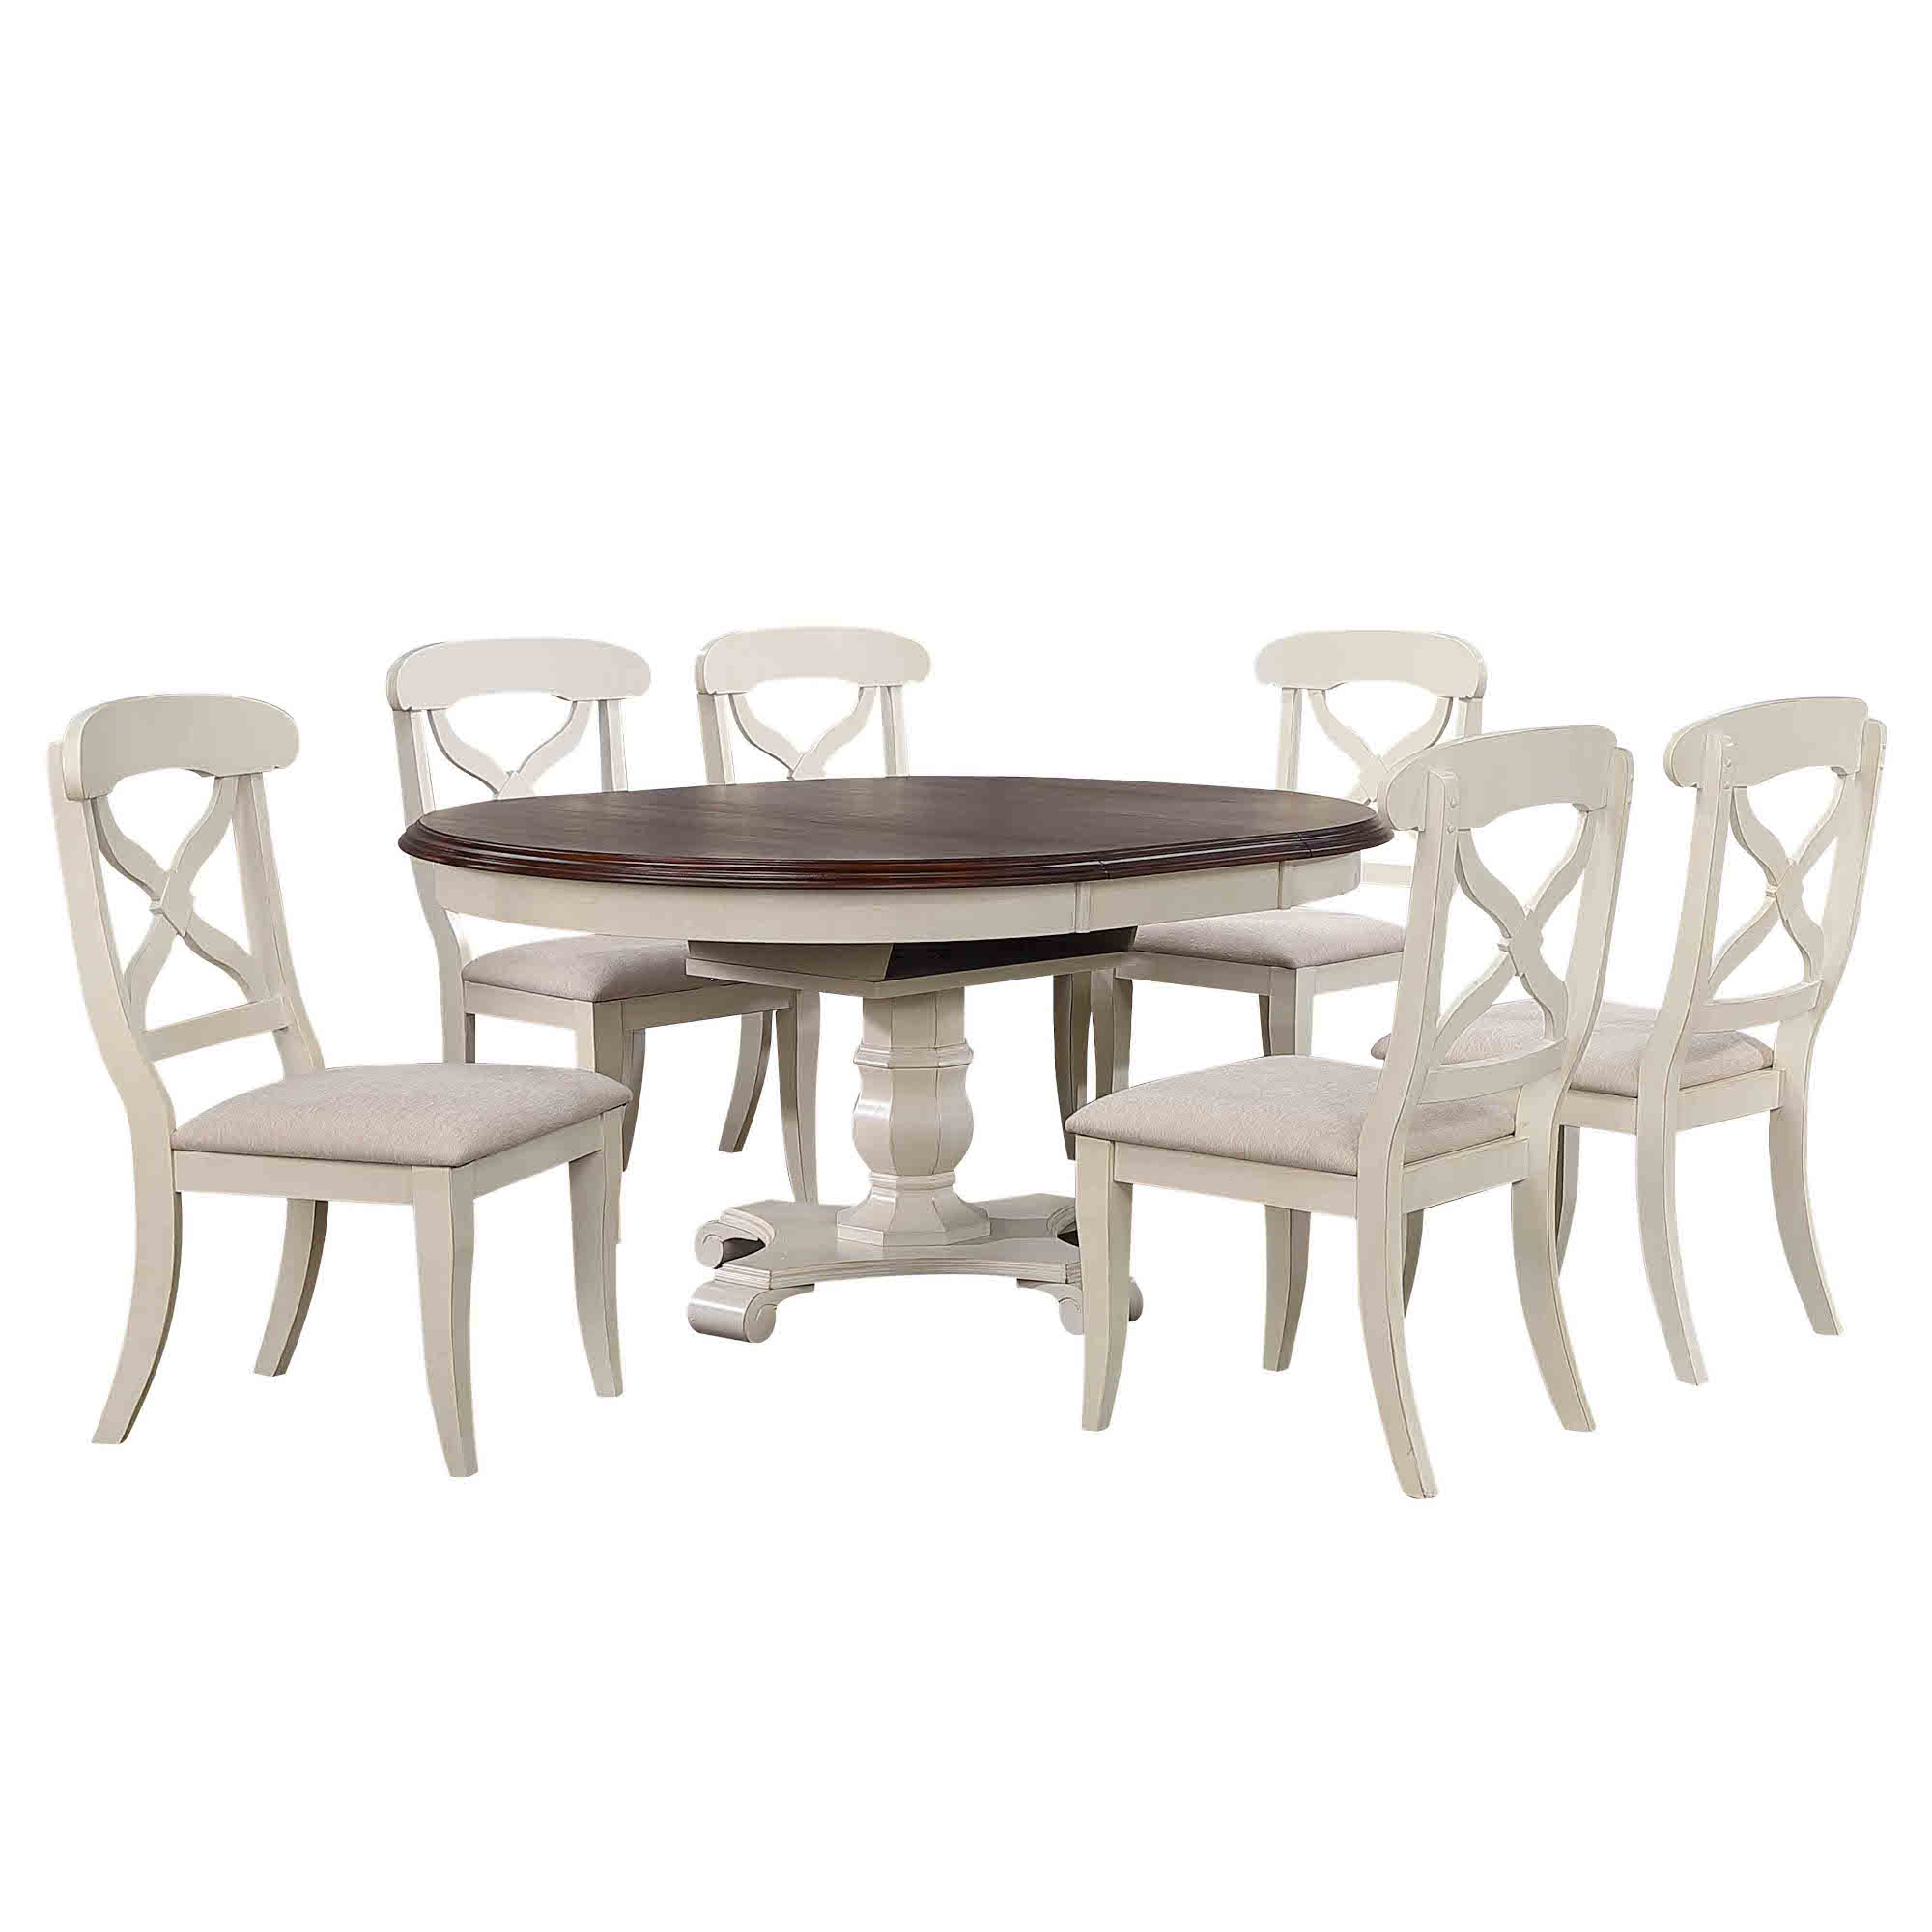 Andrews Dining- Butterfly leaf dining table with six upholstered X back chairs, table with leaf extended-DLU-ADW4866-C12-AW7P-DLU-ADW4866-C12-AW7P